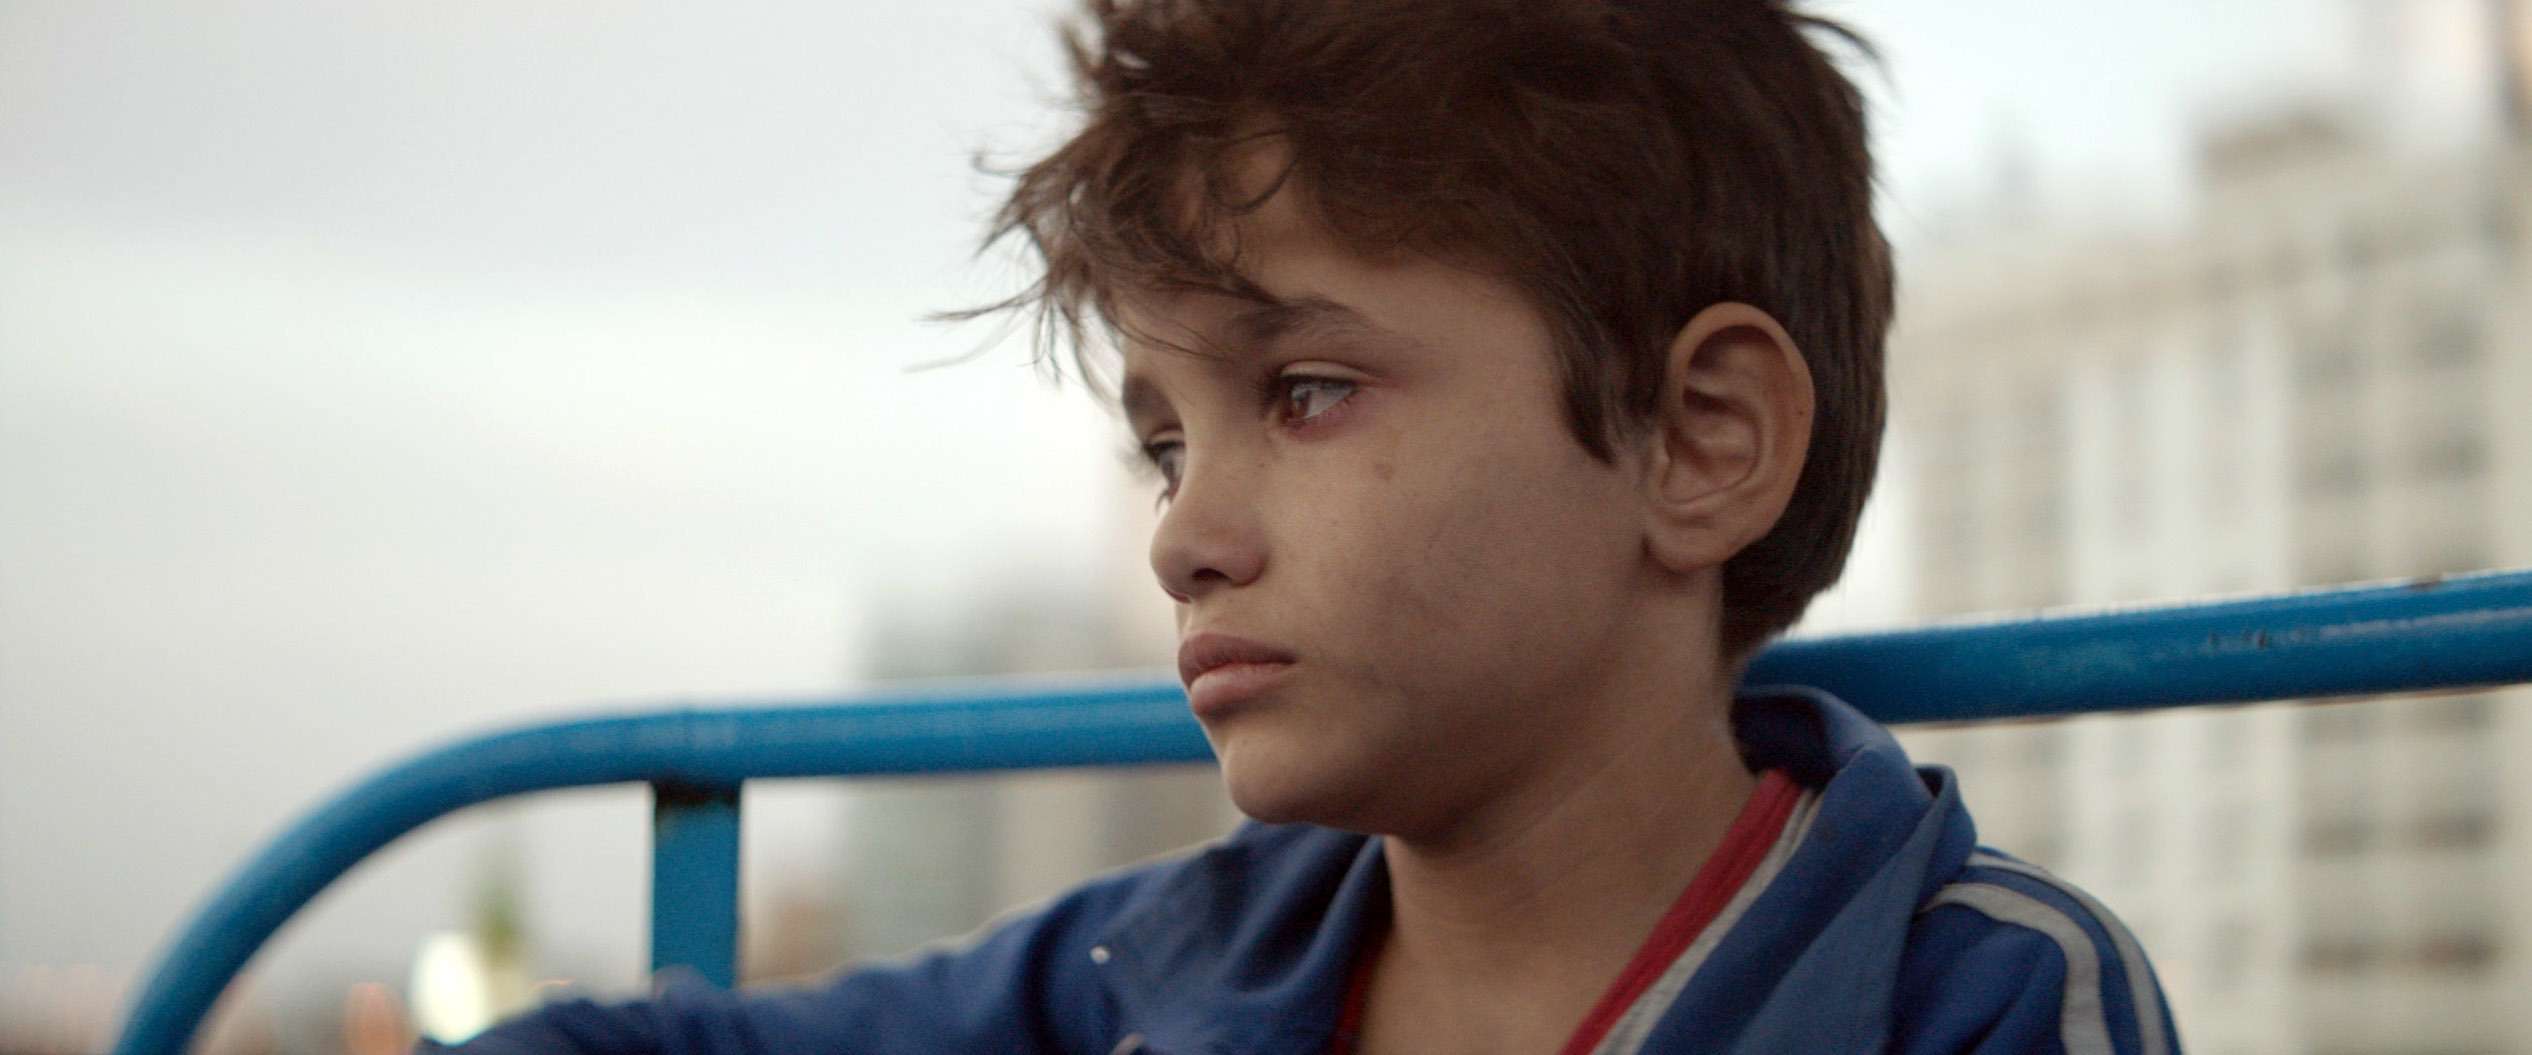 The protagonist is played by a young Syrian refugee, while another young cast member was thrown in jail during the shoot